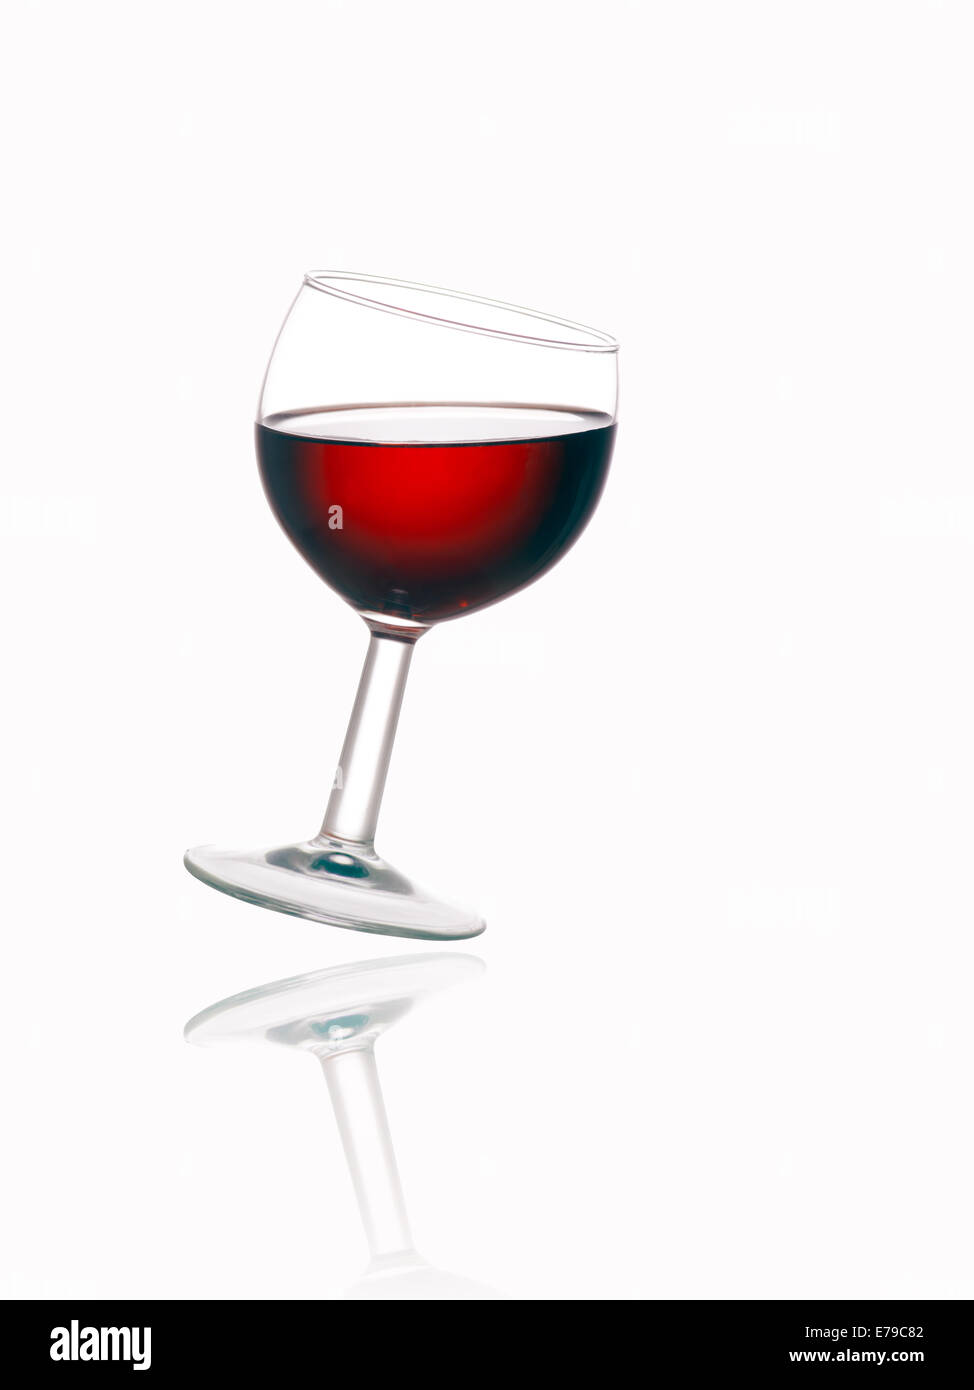 Tilted glass wine on white Cut Out Stock Images & Pictures - Alamy